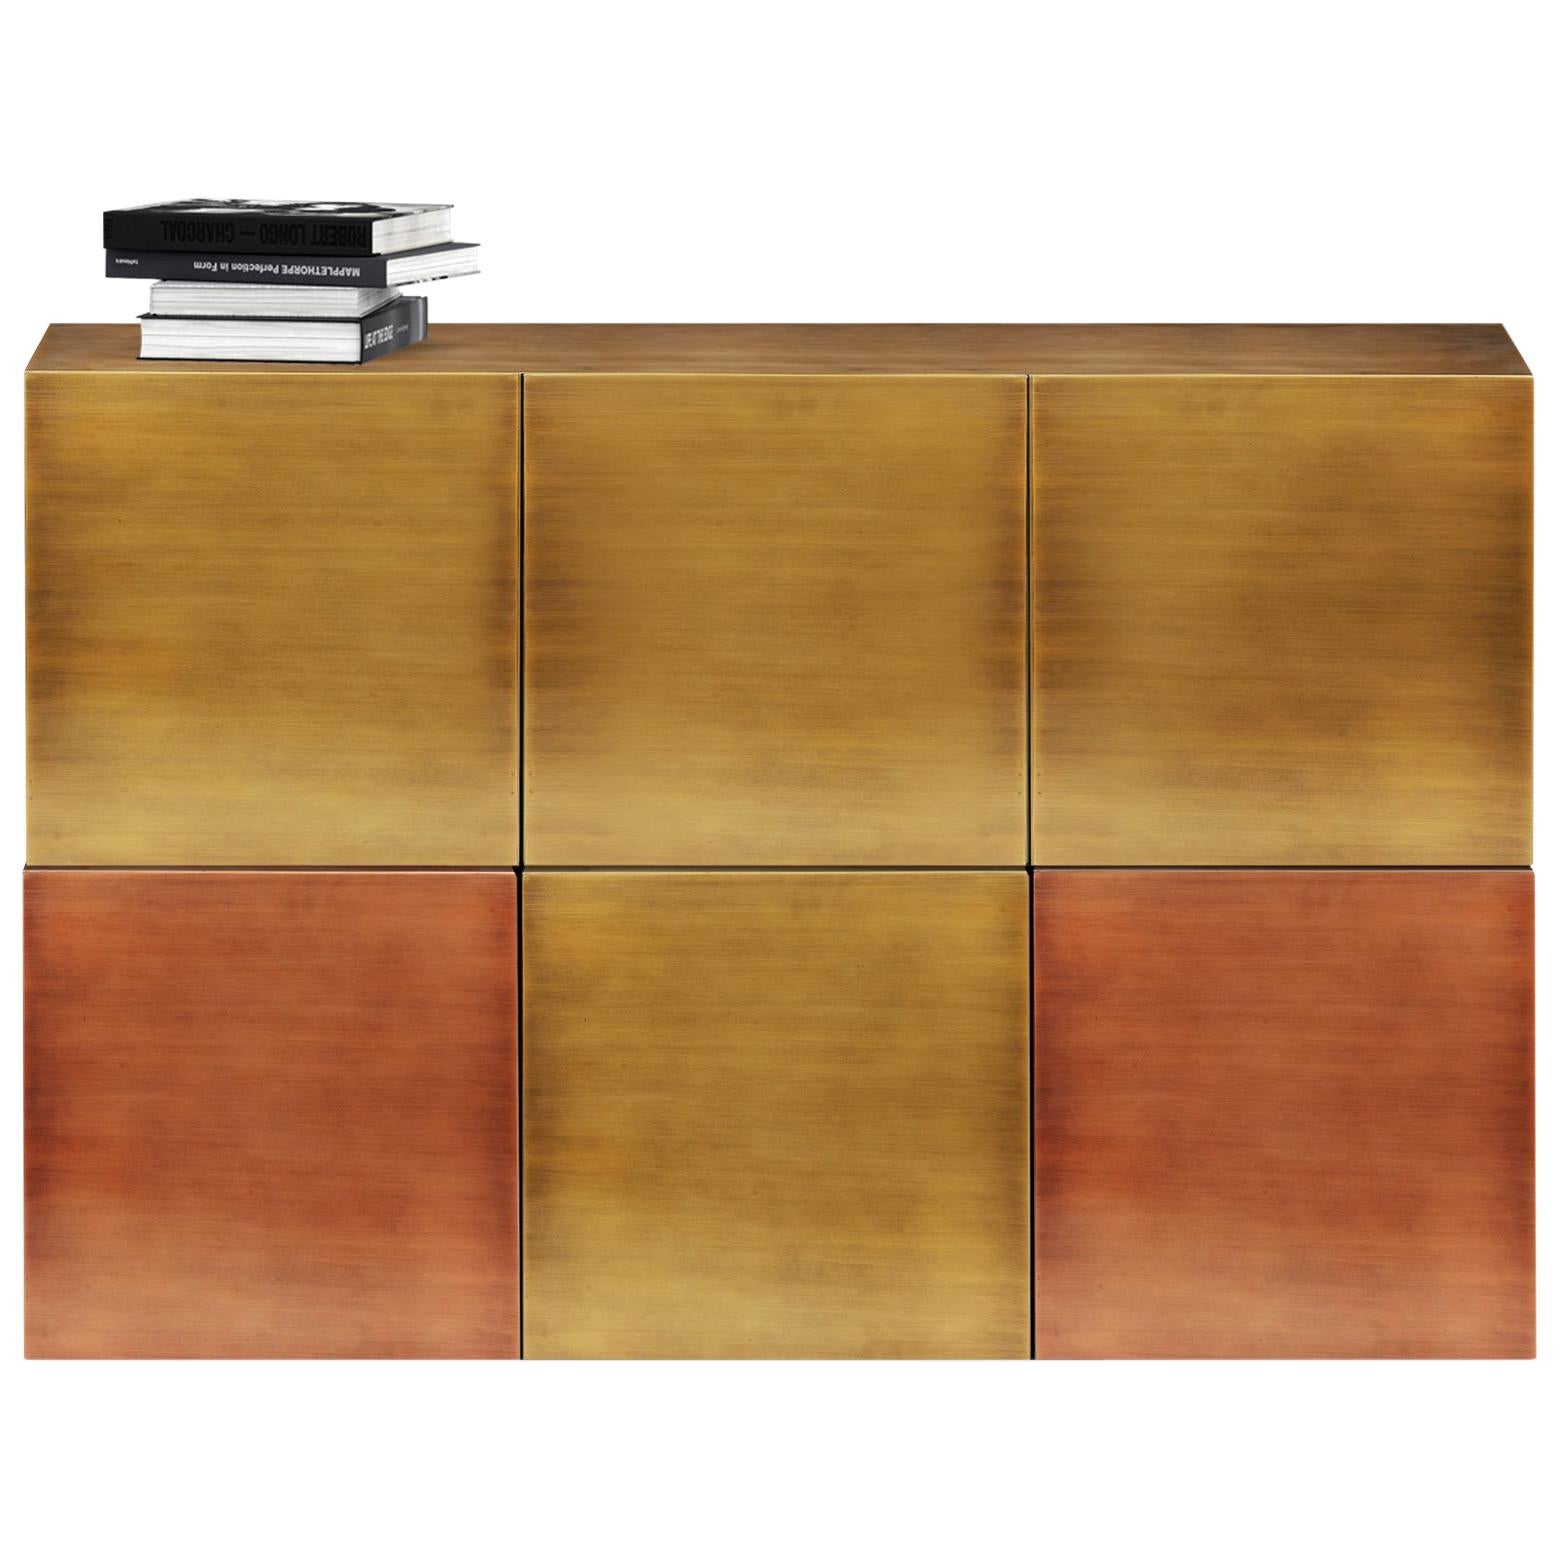 Contemporary Cucu Sideboard or Credenza in Brushed Brass with Copper